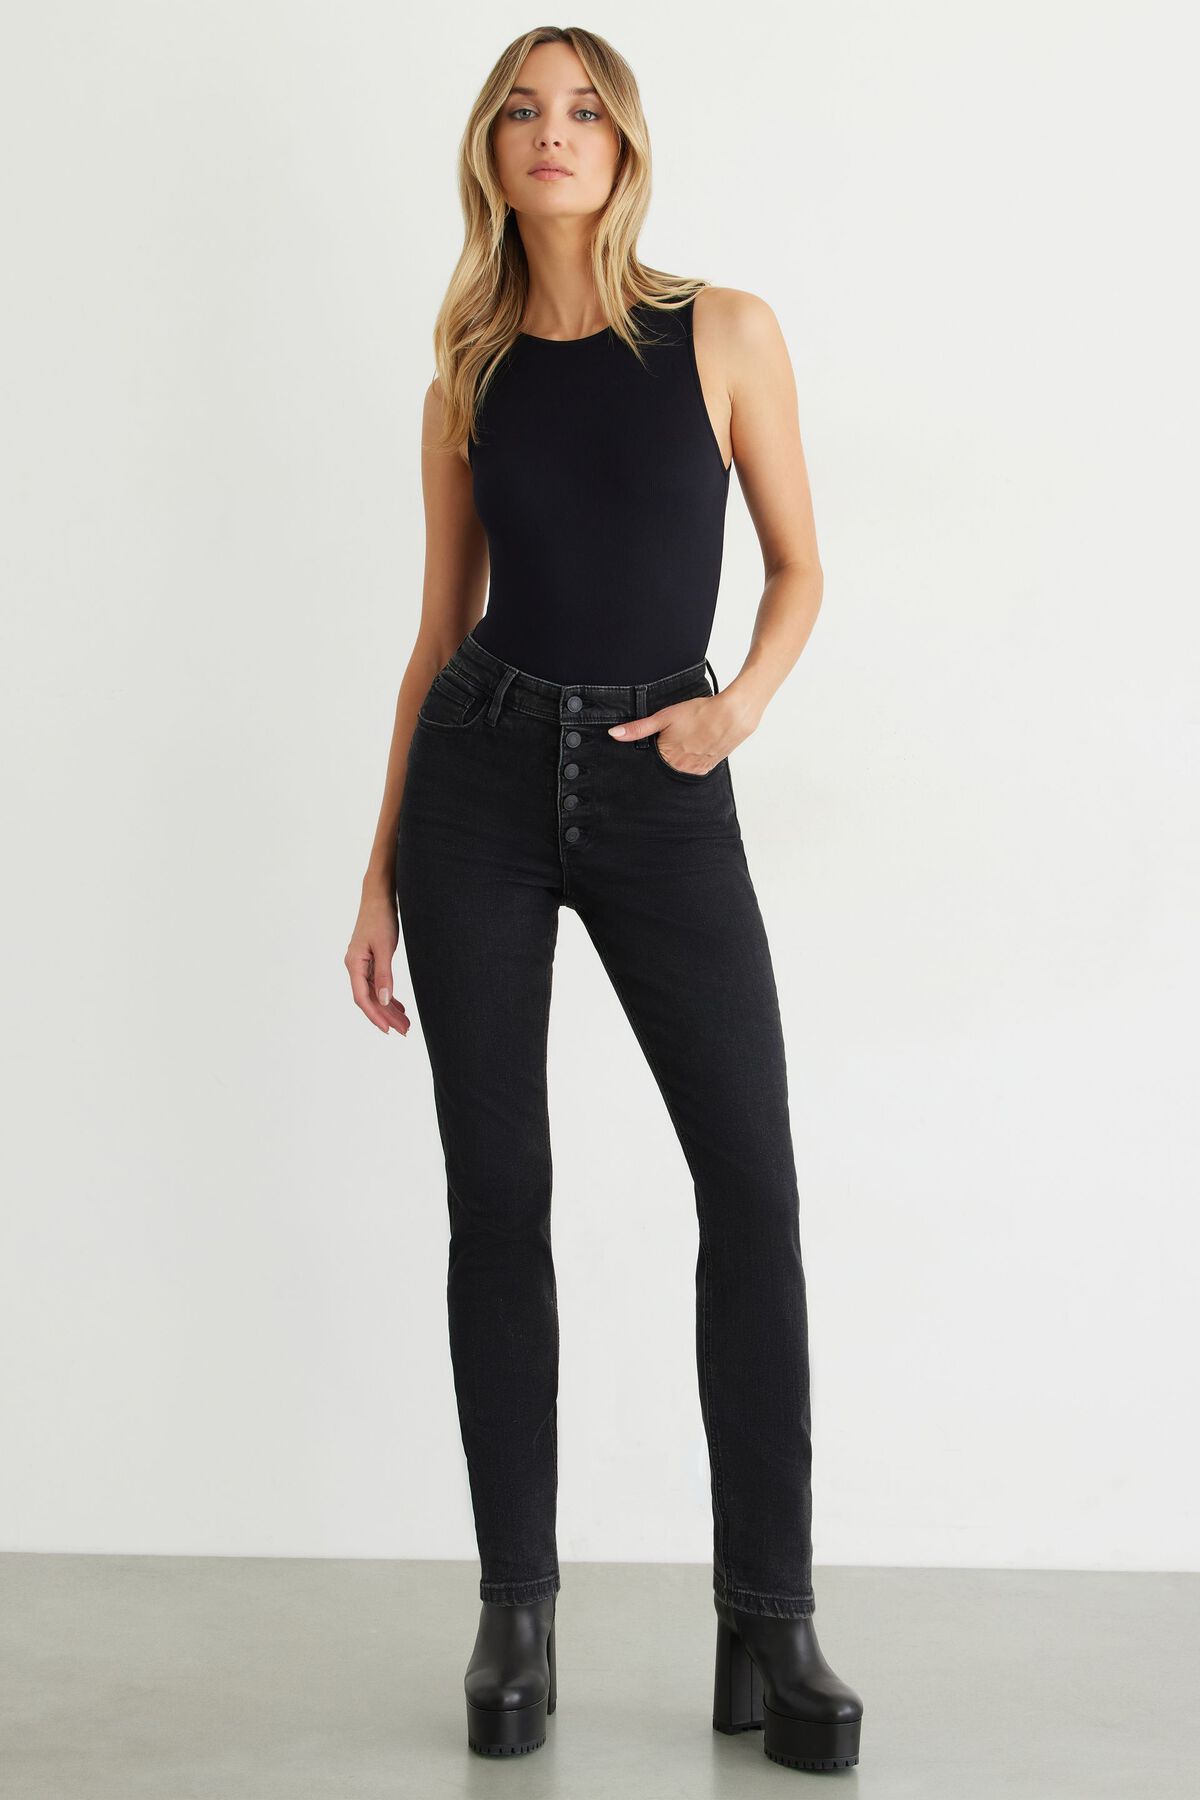 Dynamite Kate High Waist Button Front Jeans. 1